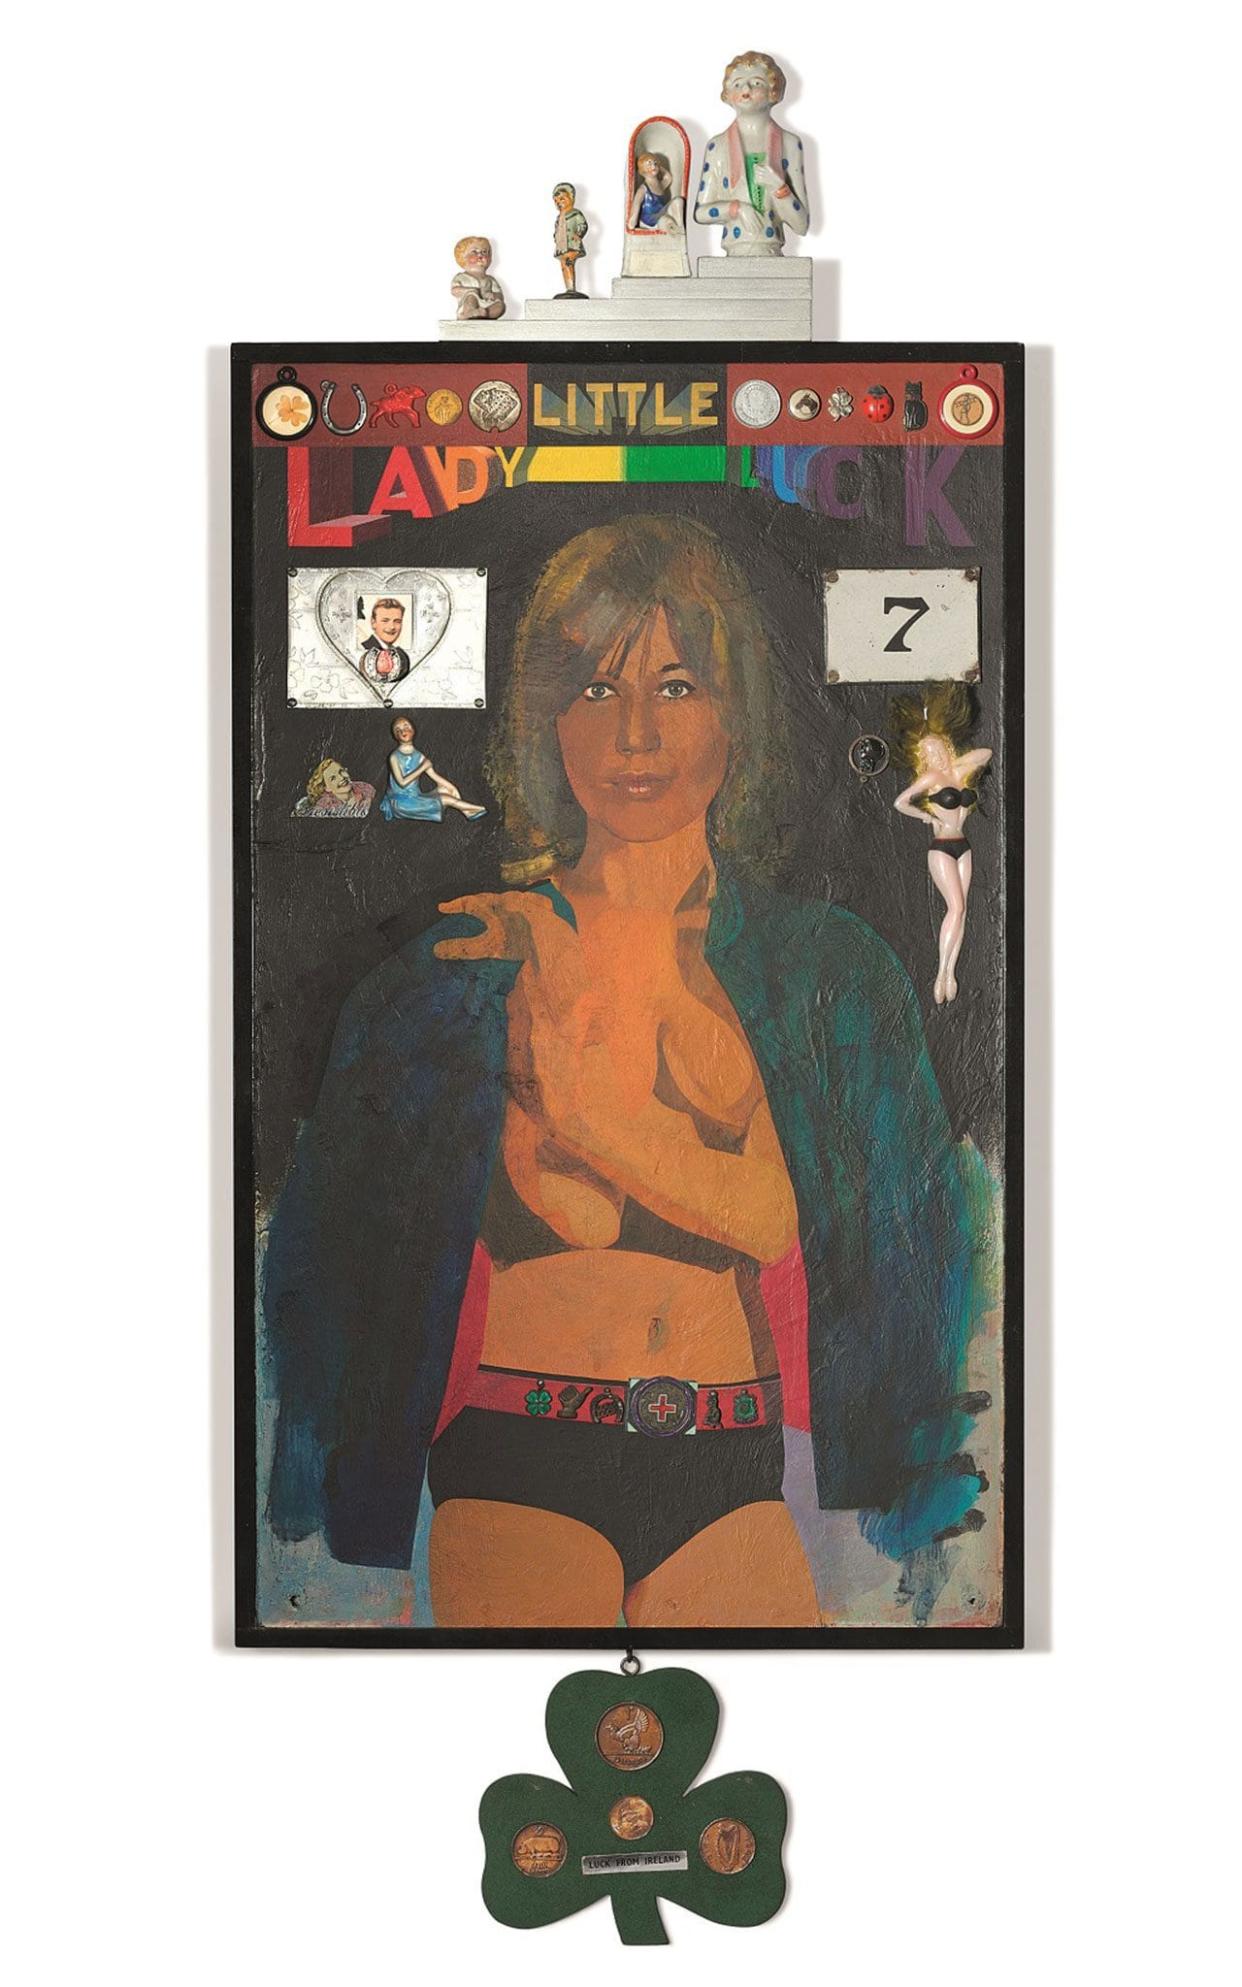 Sir Peter Blake, R.A. (b. 1932) Little Lady Luck, Constructed in 1965. Estimate: £600,000-800,000. Sold: £704,750 - © Christie’s Images Limited 2017 